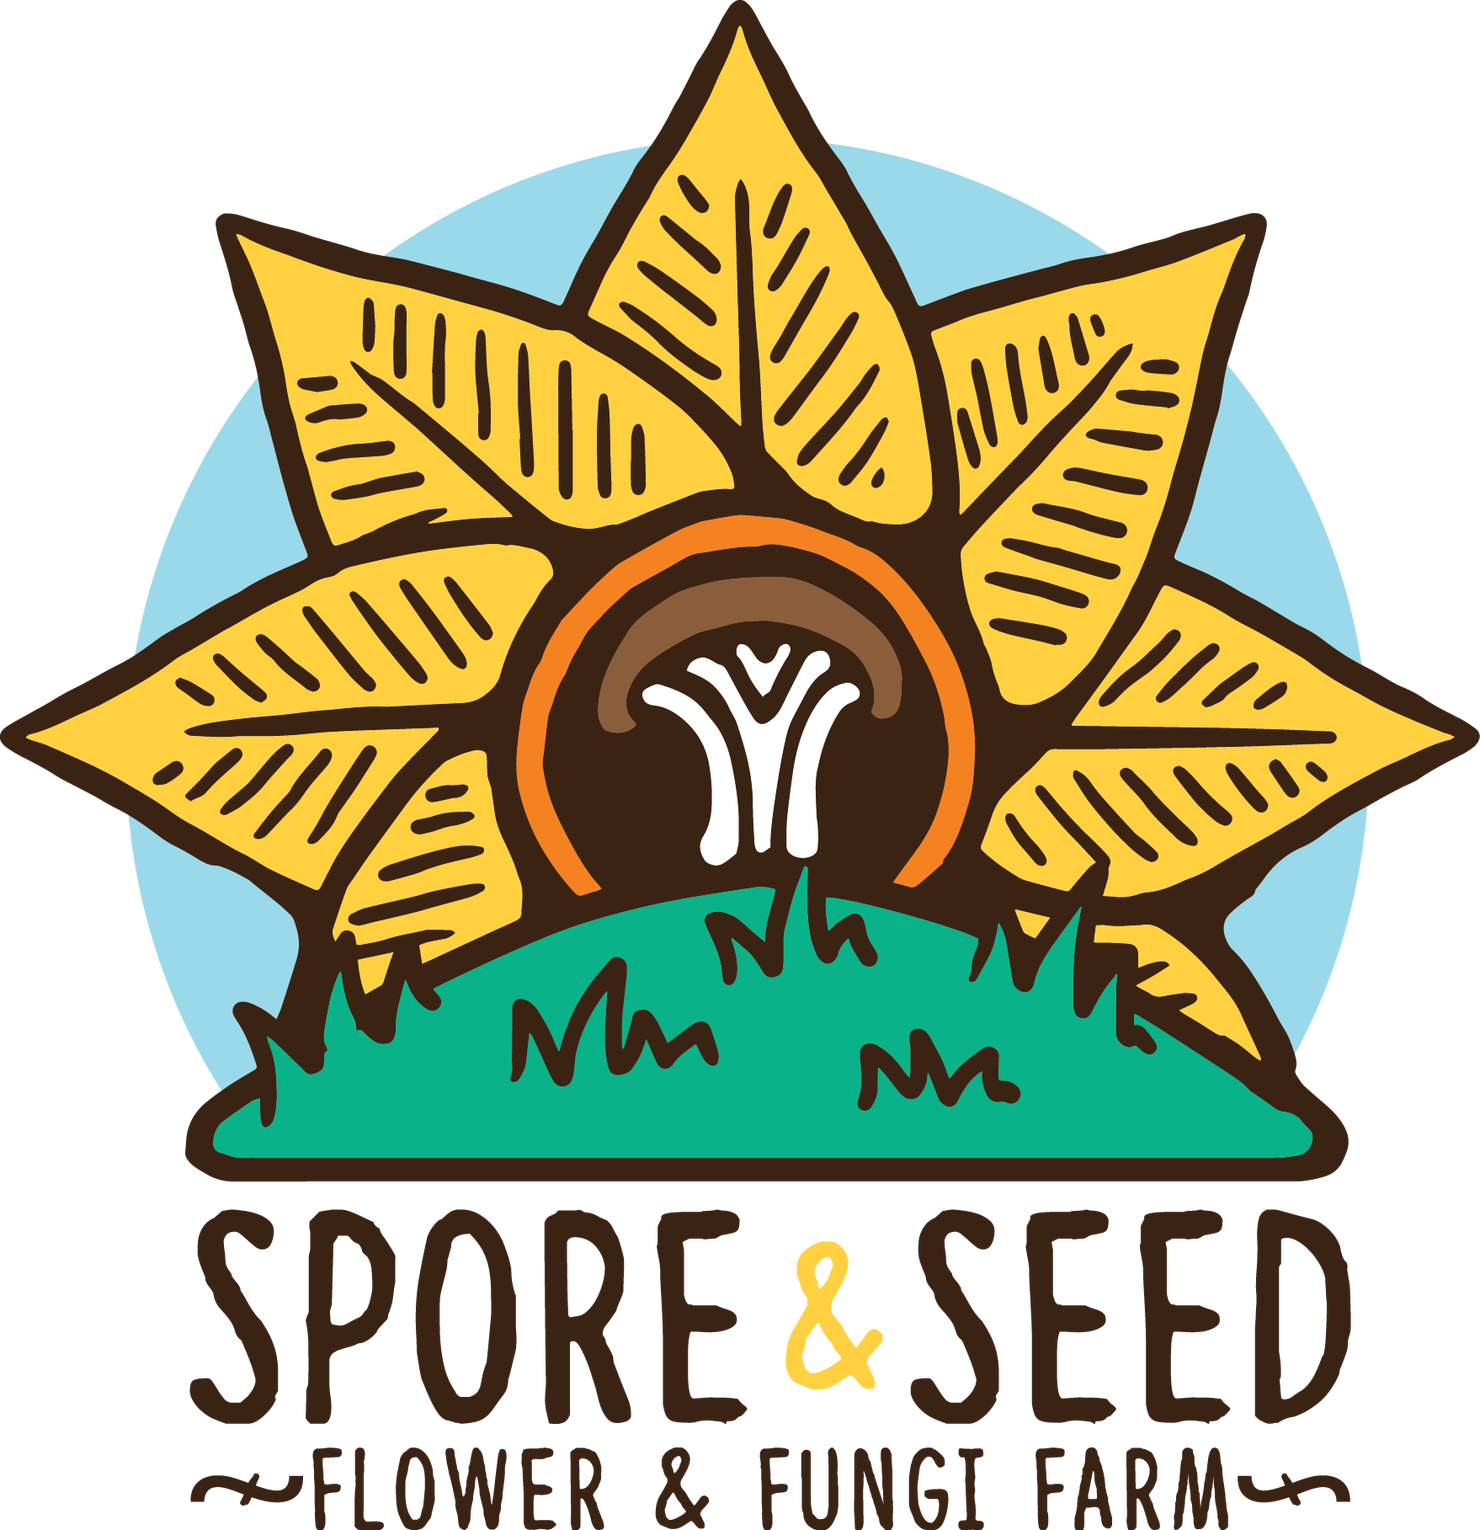 Spore and Seed